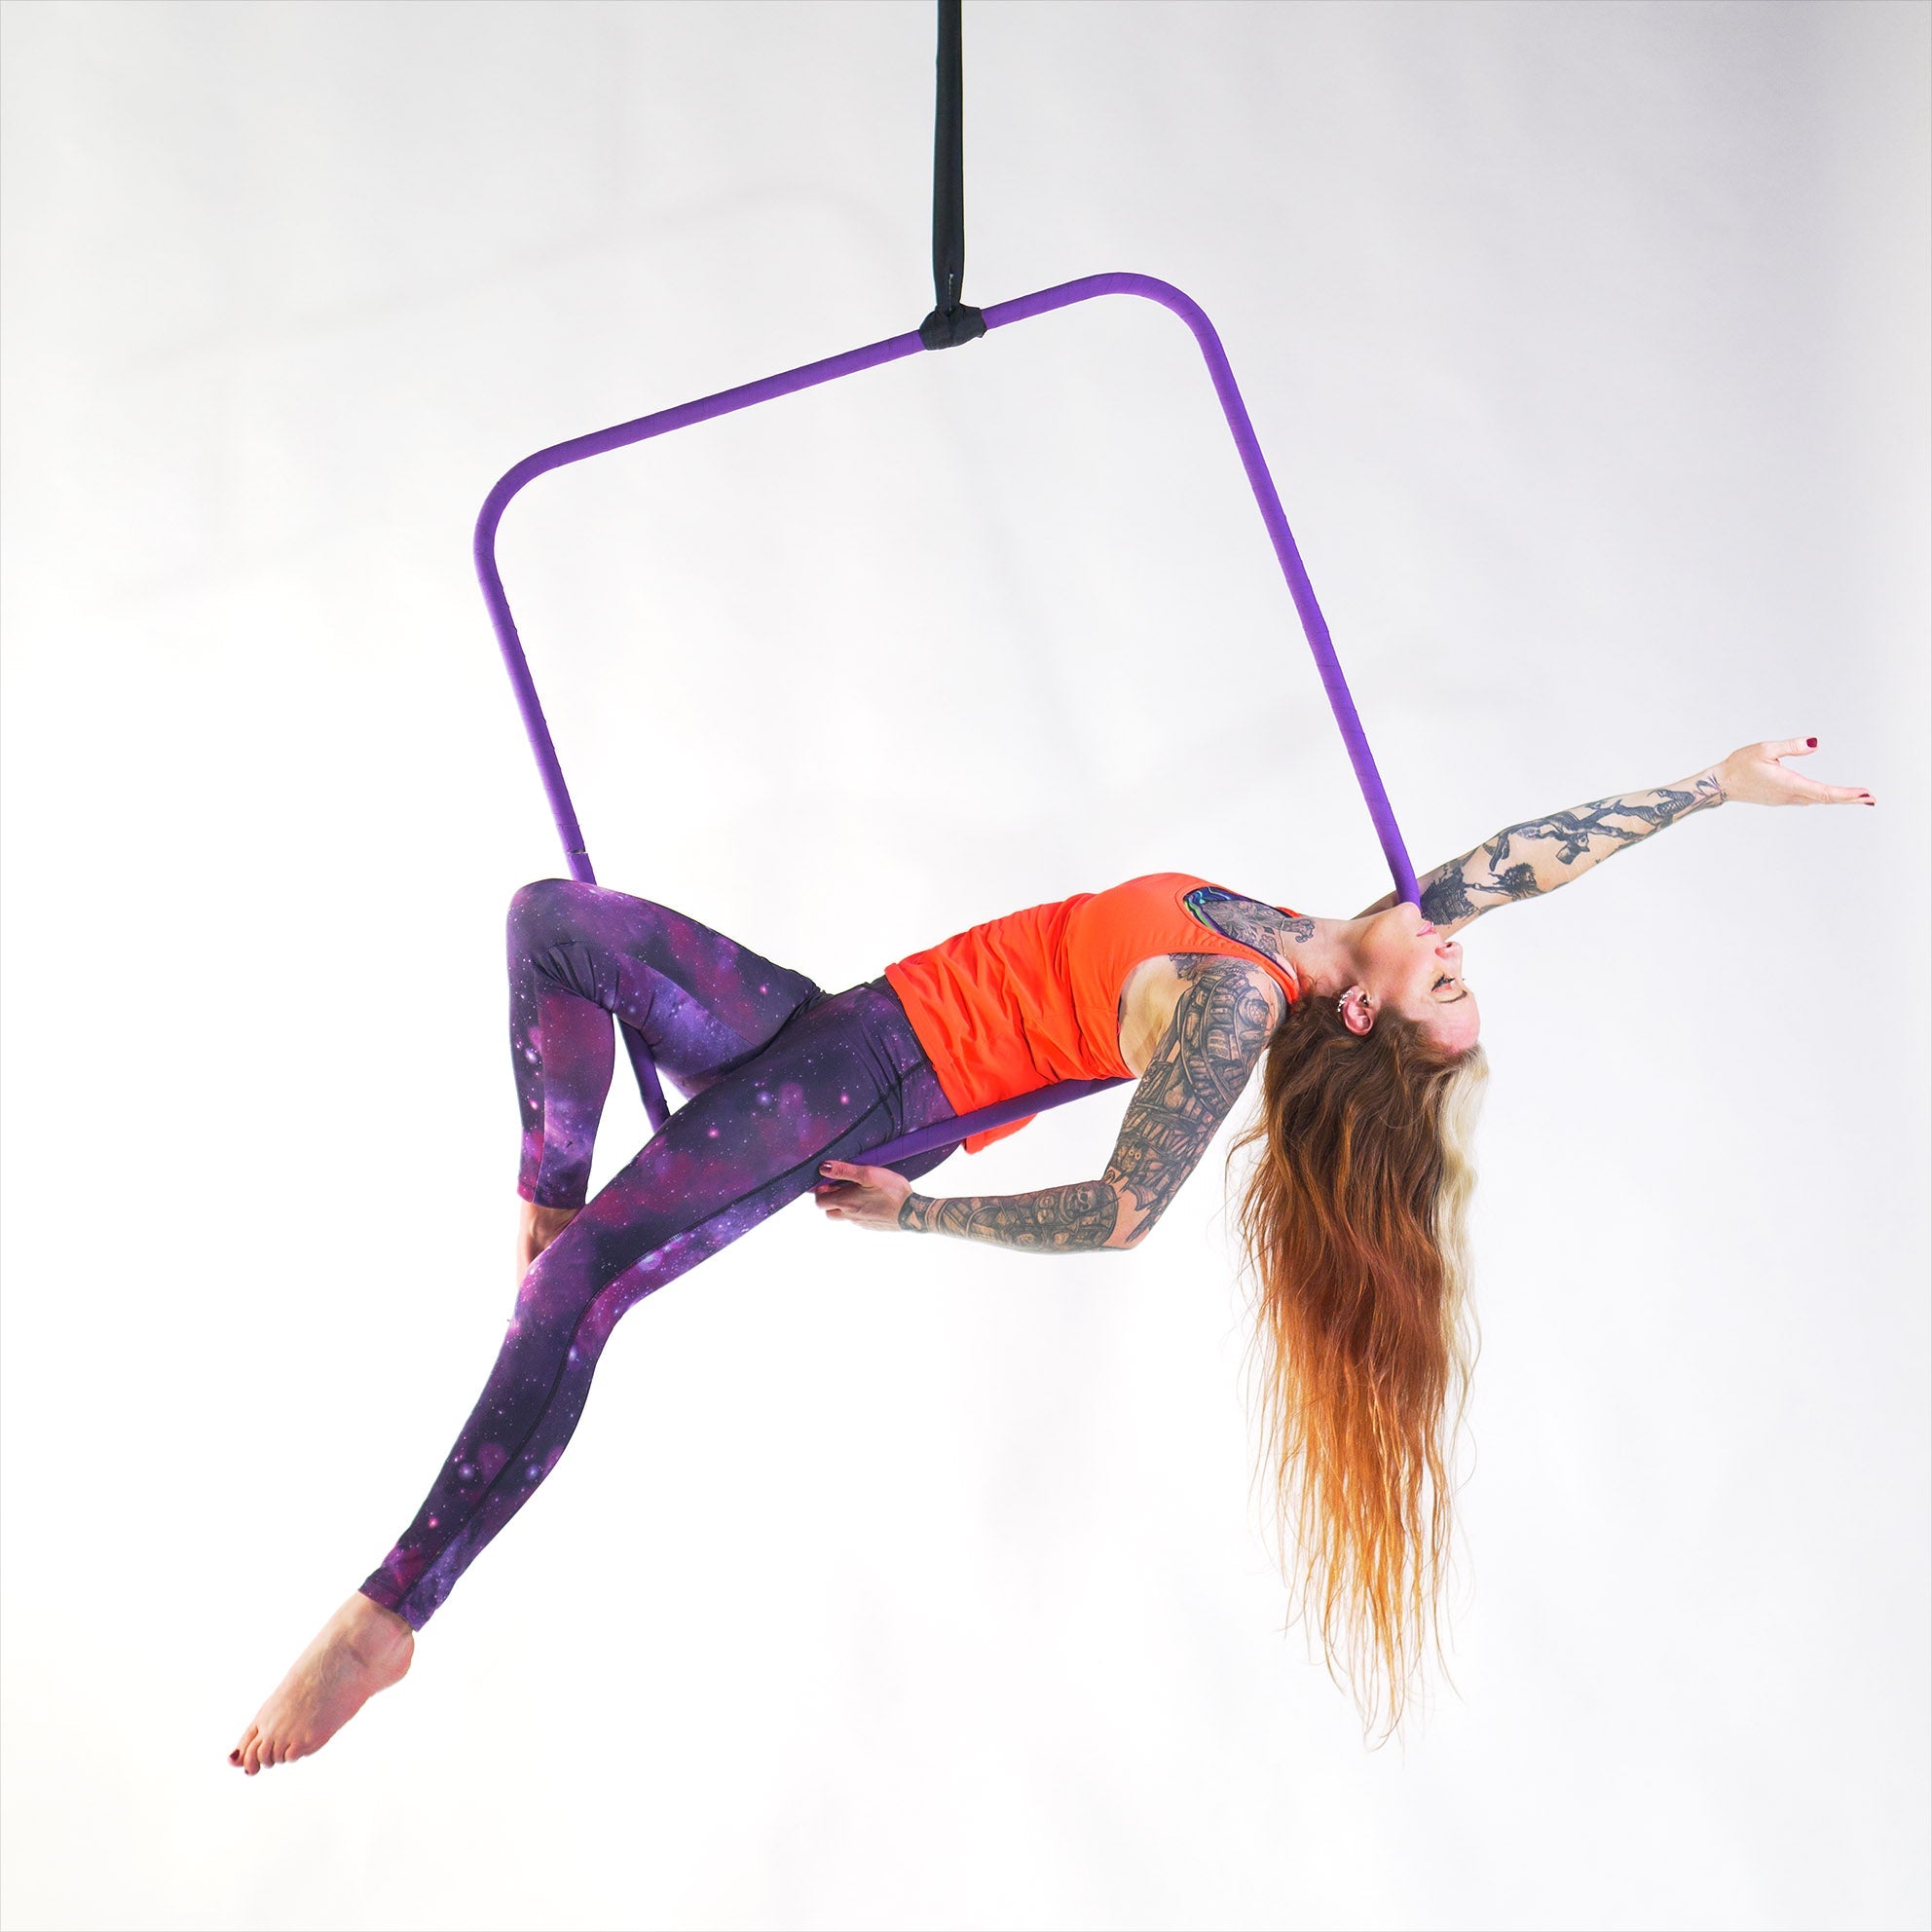 performer in the aerial square